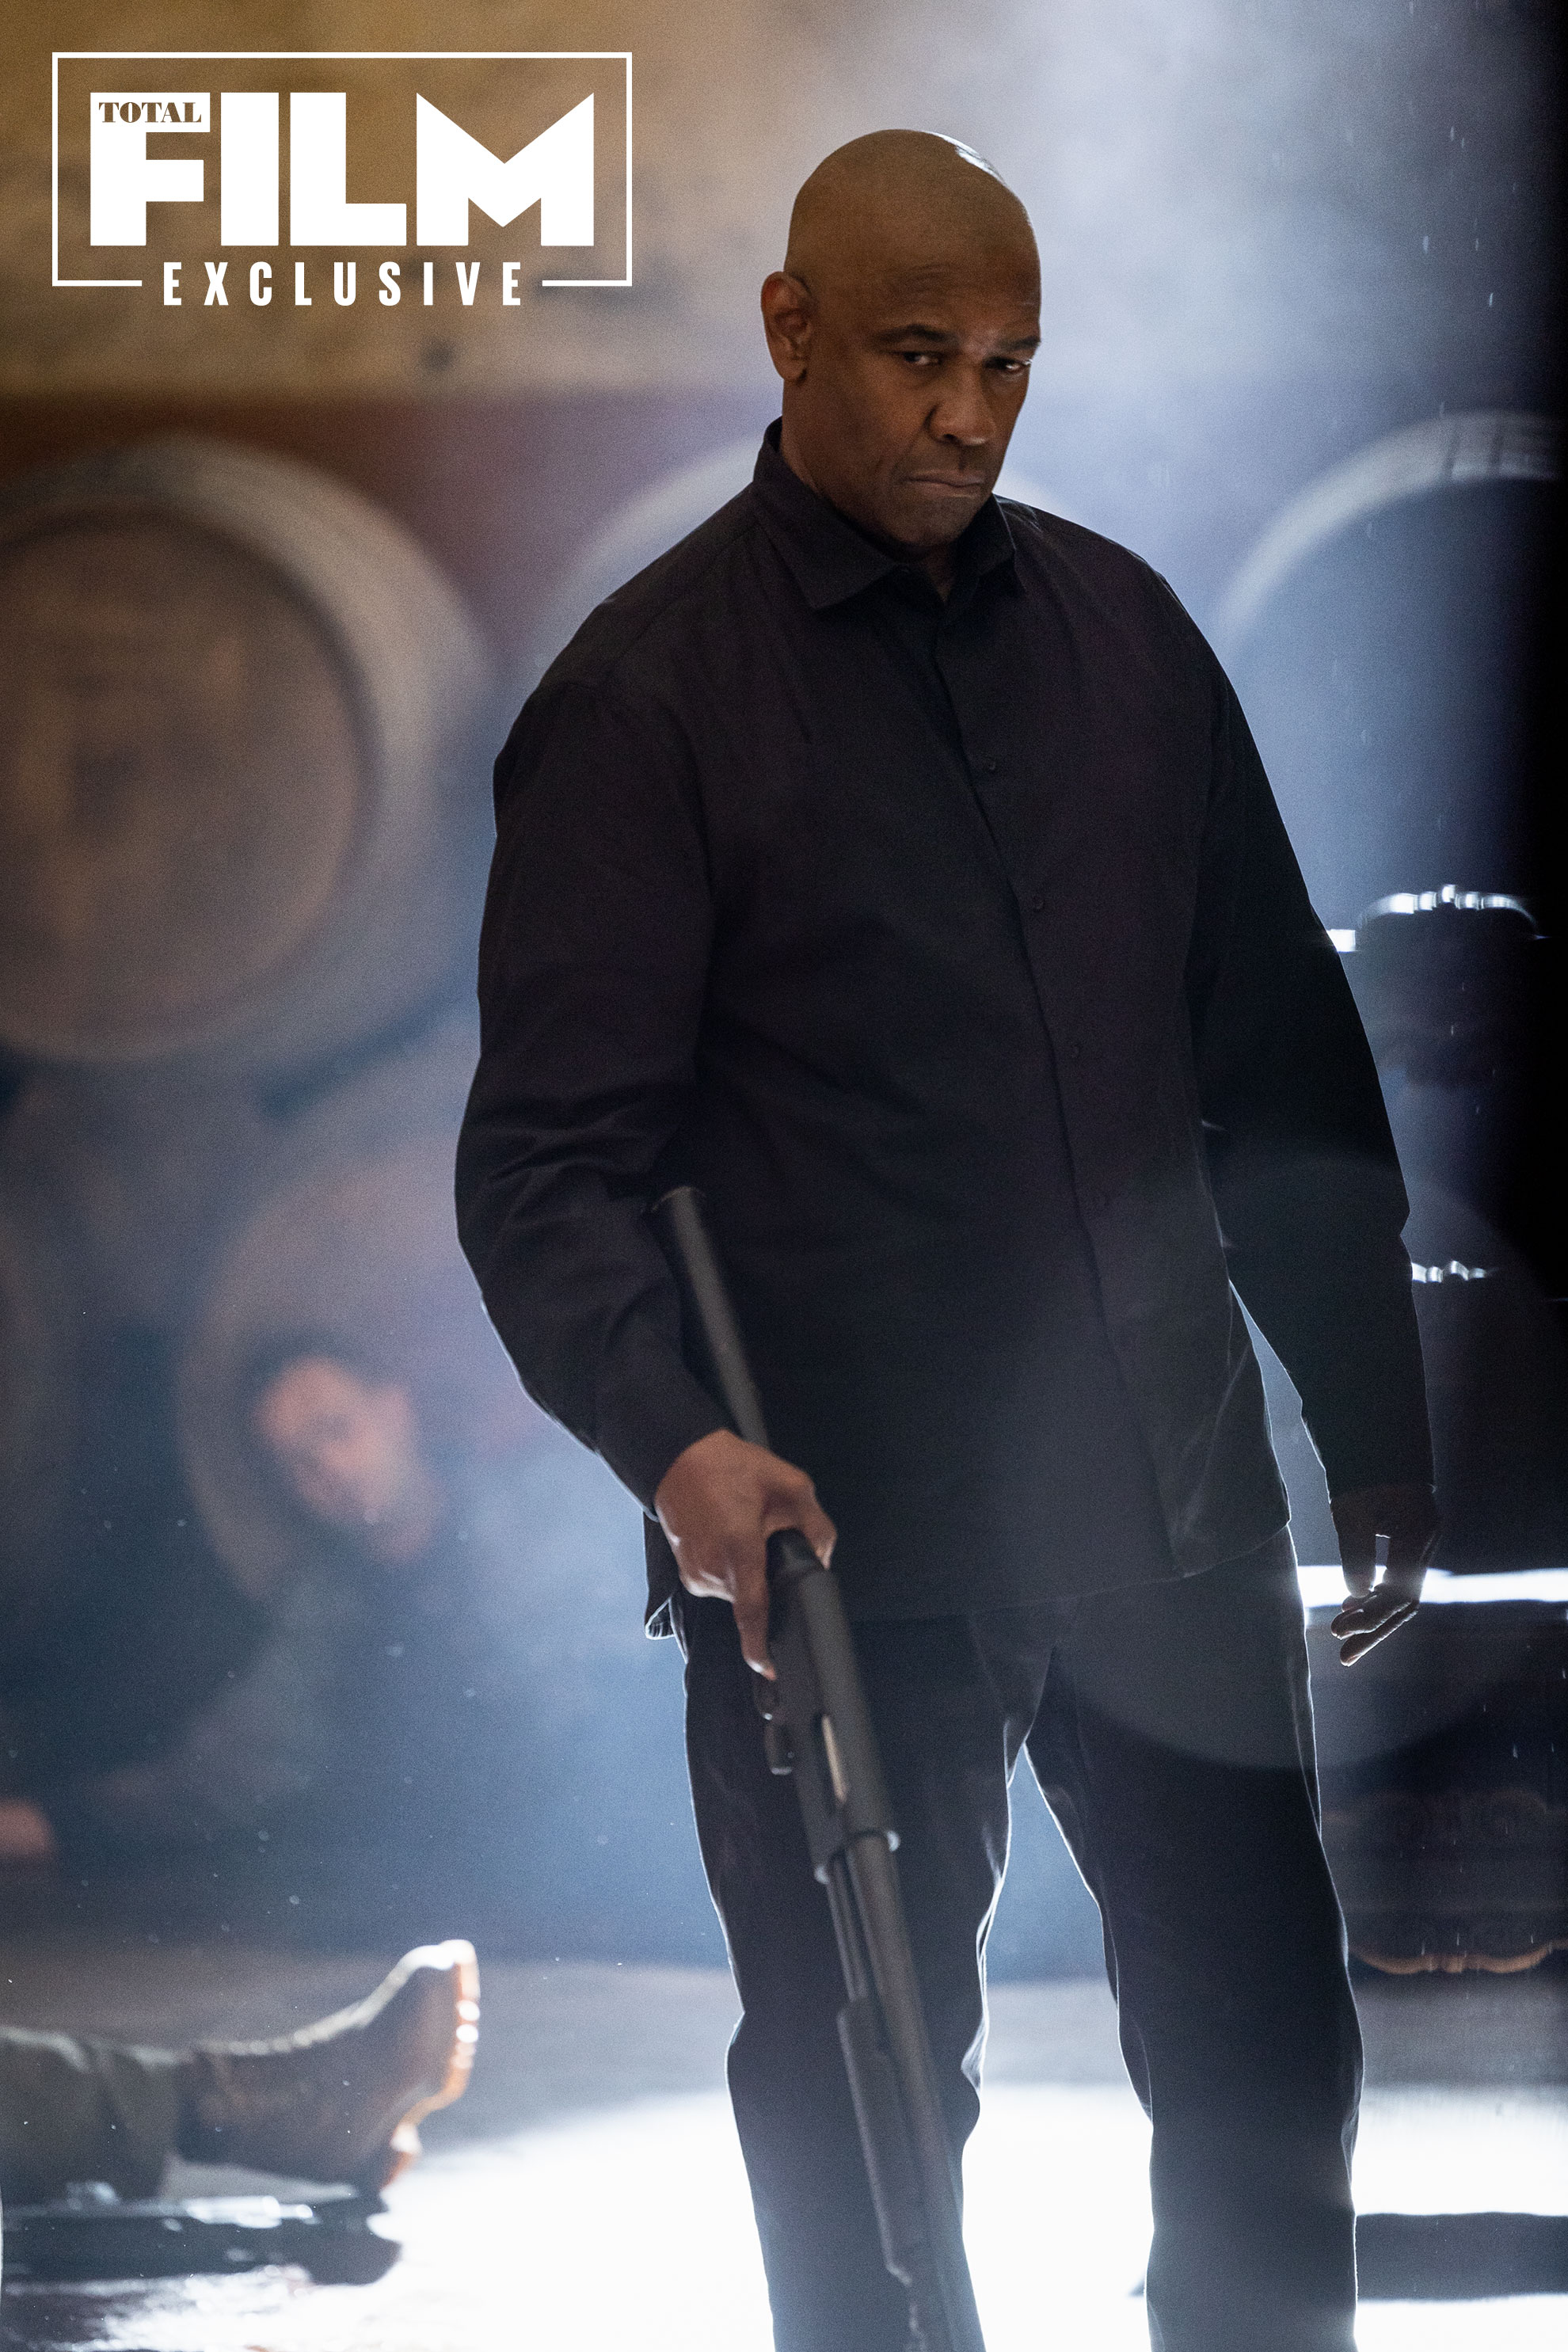 An exclusive image from The Equalizer 3